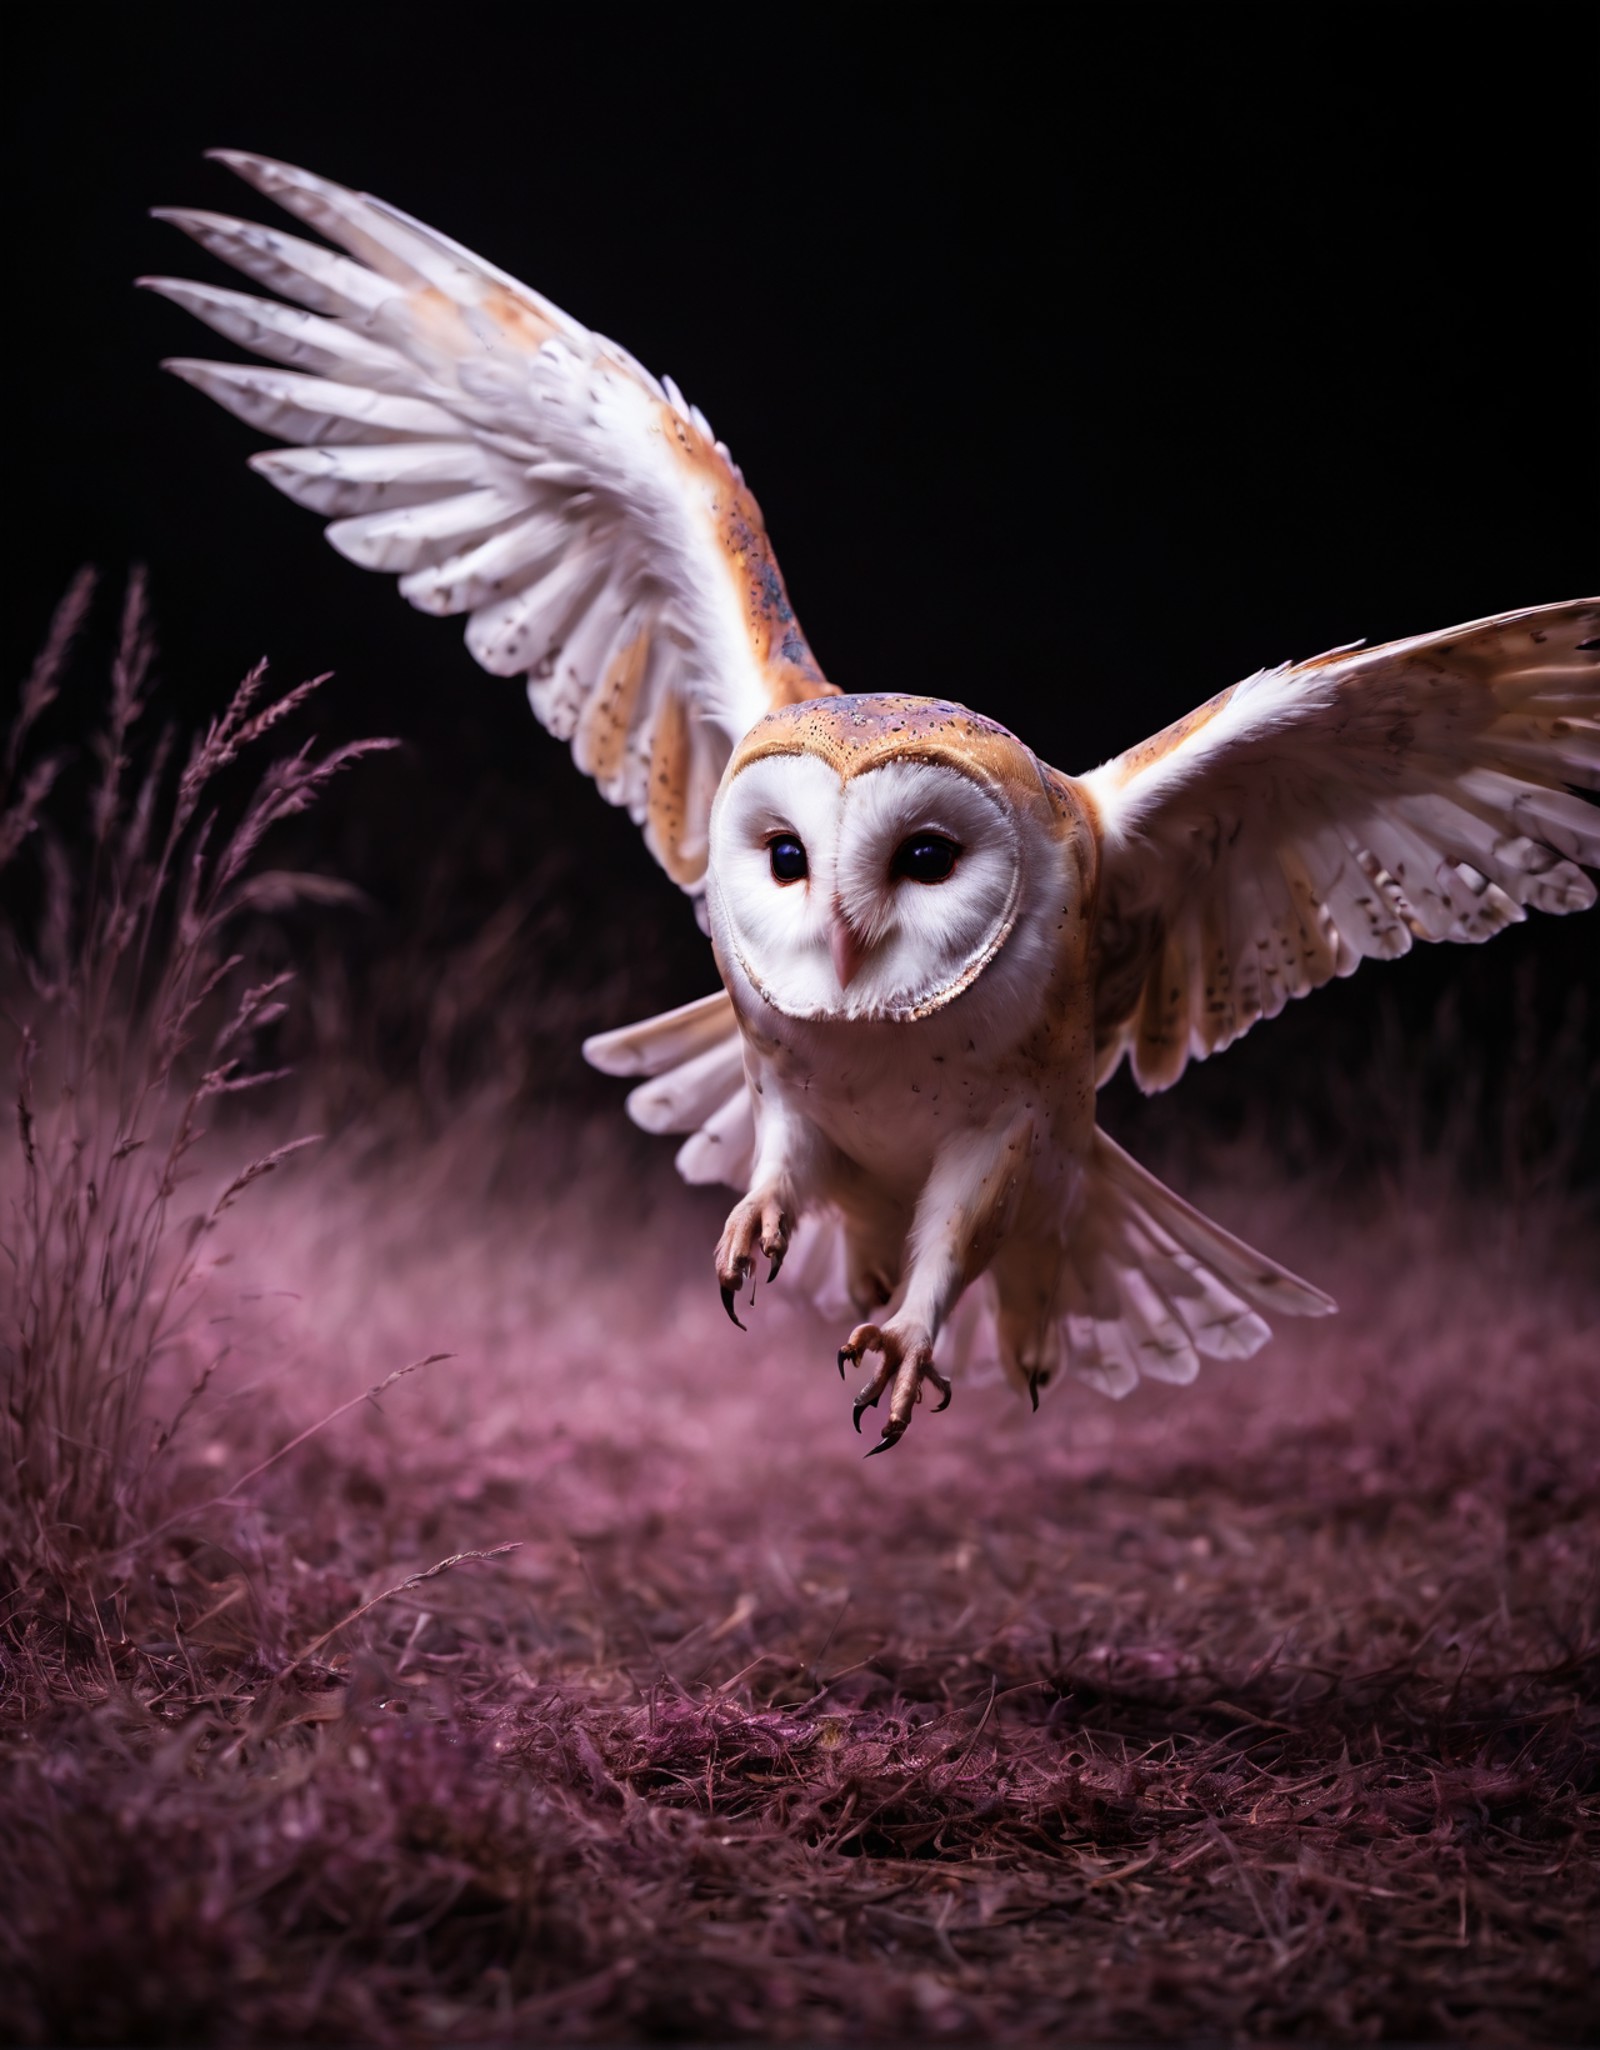 The scene depicts a wild Barn Owl, with the speed of its motion leaving behind traces. The animal's gaze is focused and aw...